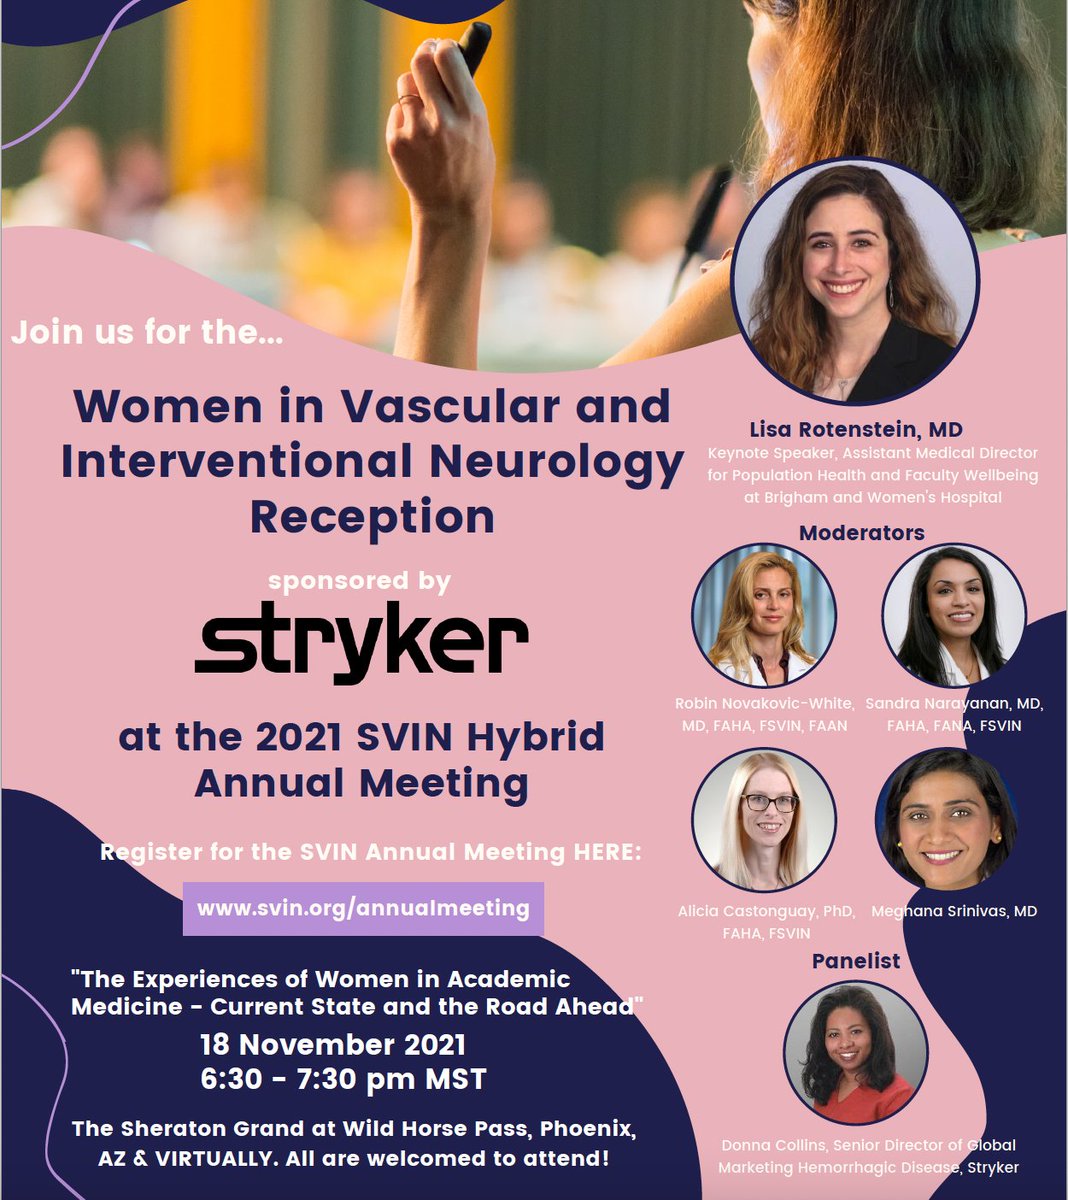 Women in Vascular & Interventional Neurology, please join us for our reception #SVIN2021 Annual Meeting. Nov 18, 2021 6:30-7:30 MST guest speaker Lisa Rotenstein. 'Experiences of women in academic medicine: current state & road ahead' svin.org/annualmeeting @Robin_Novakovic